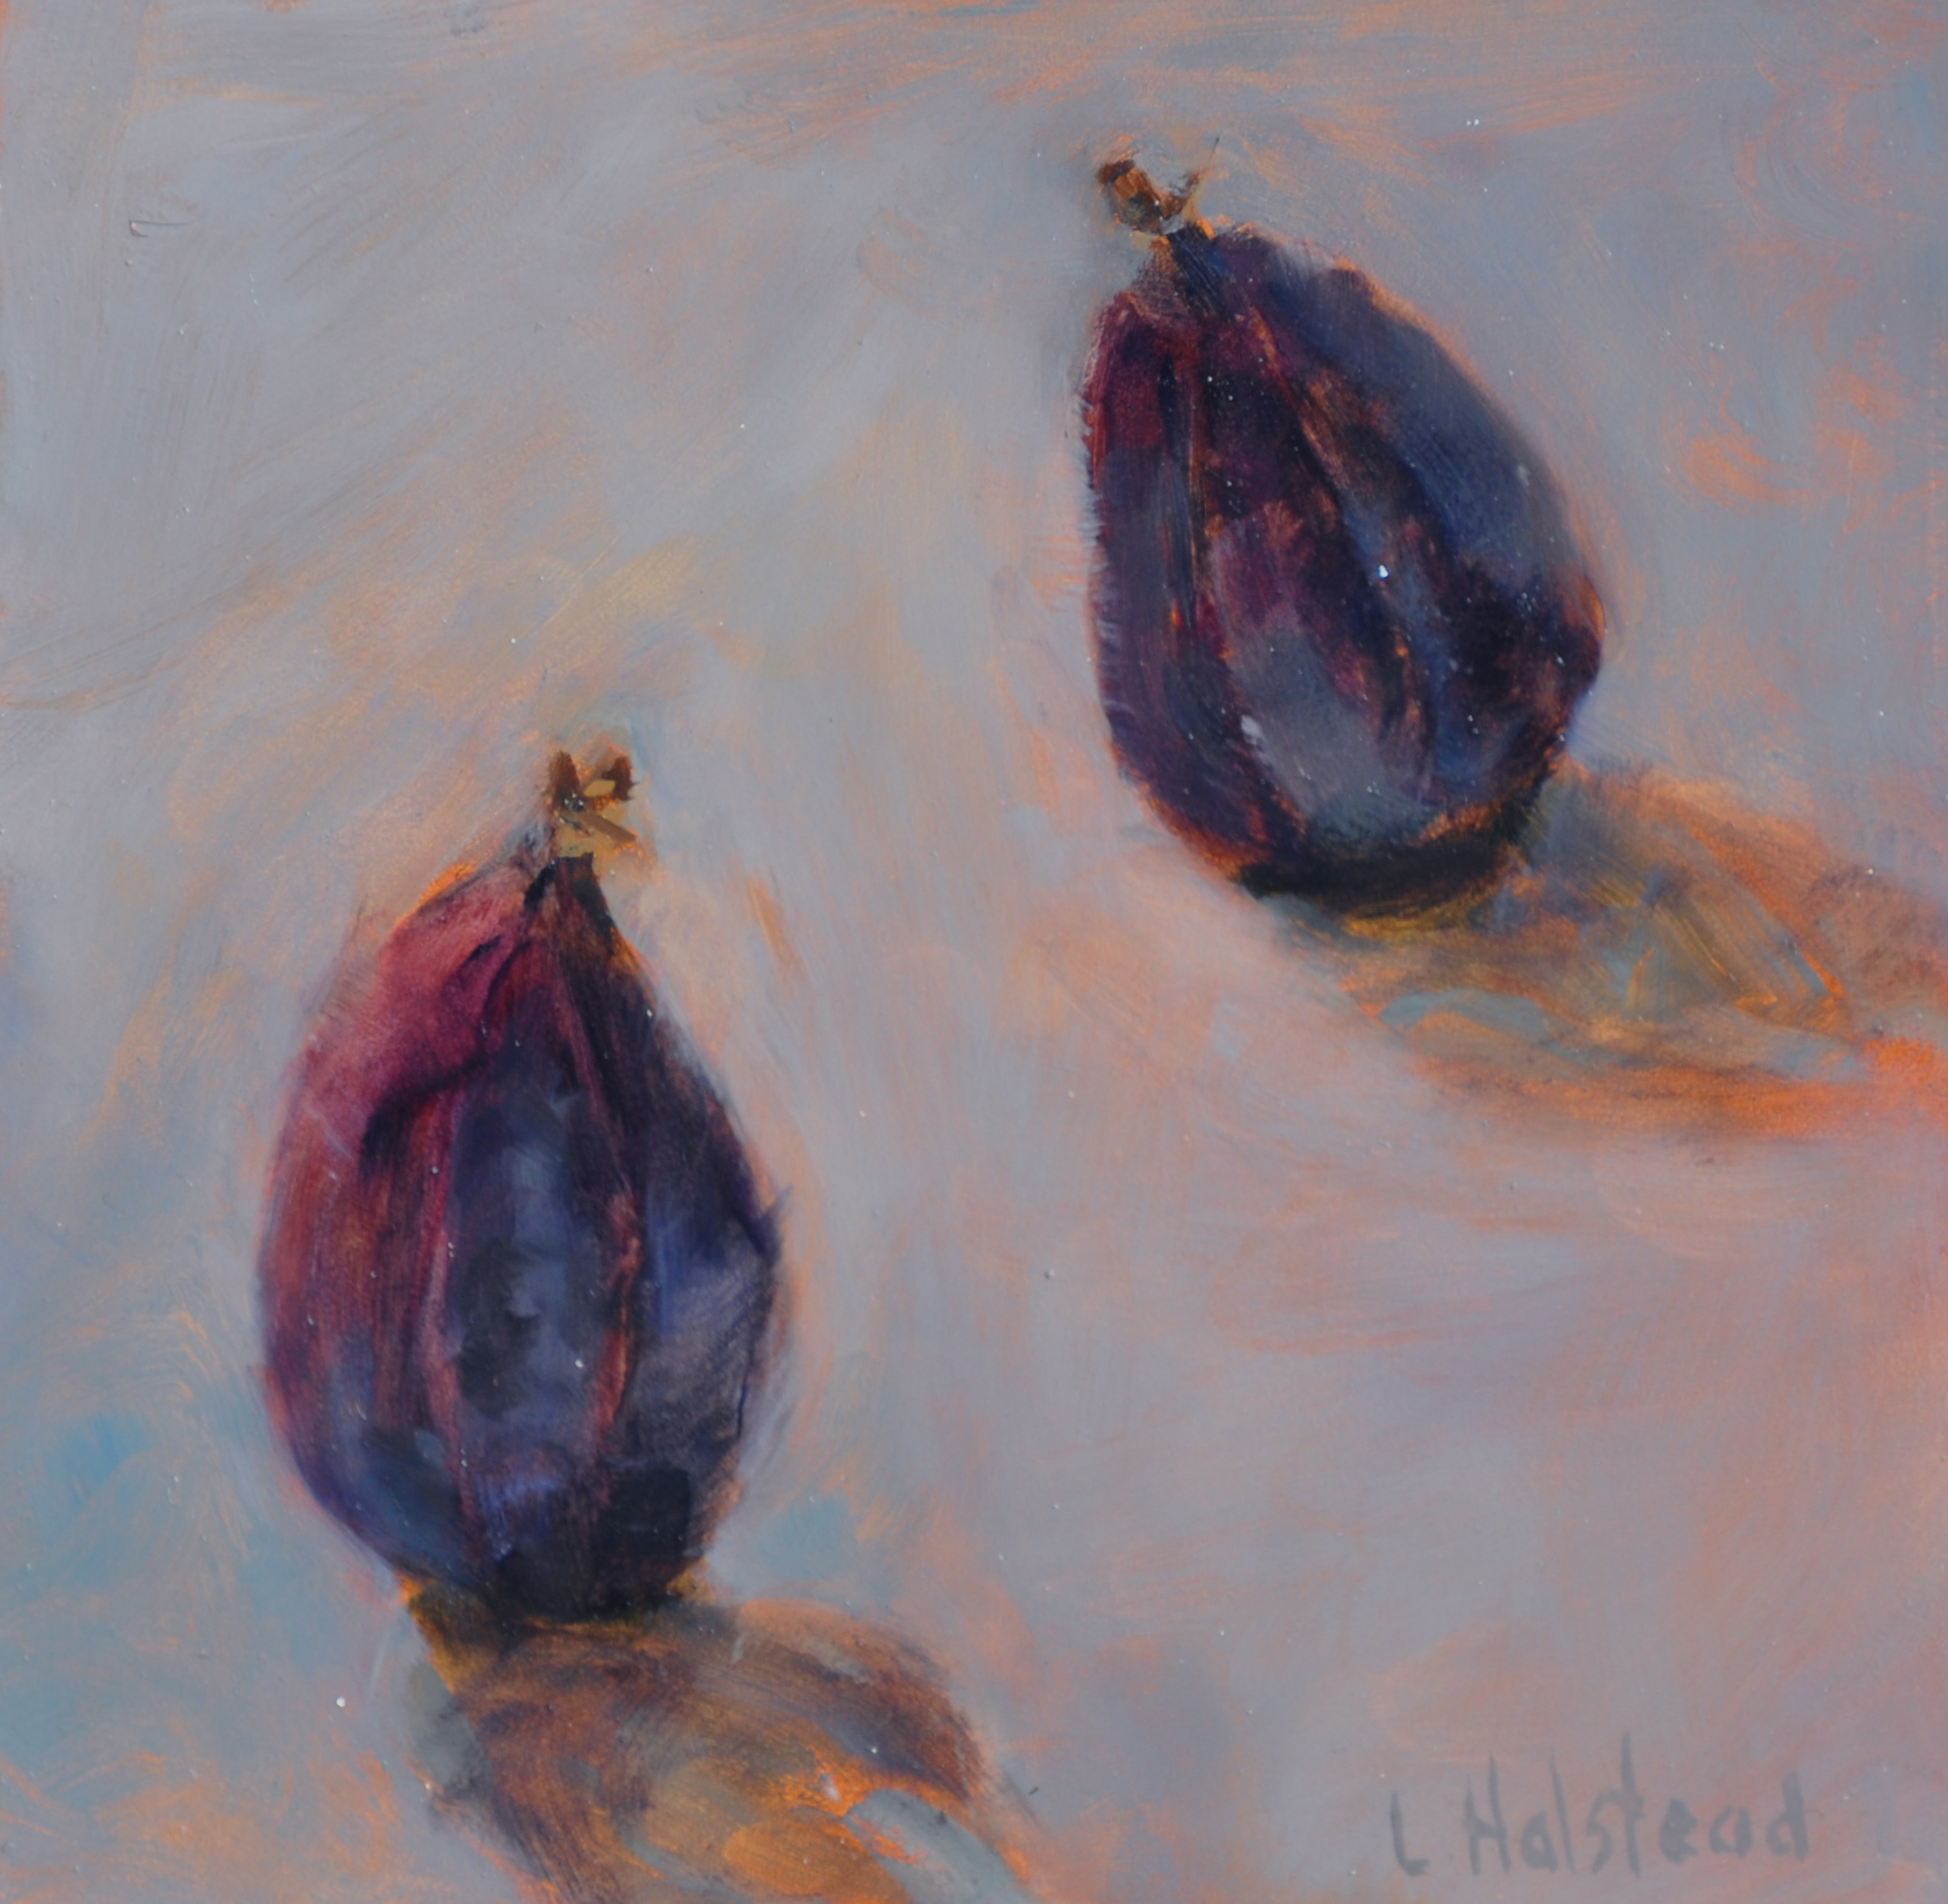 Two Figs, Oil on Linen, 6 x 6, sold